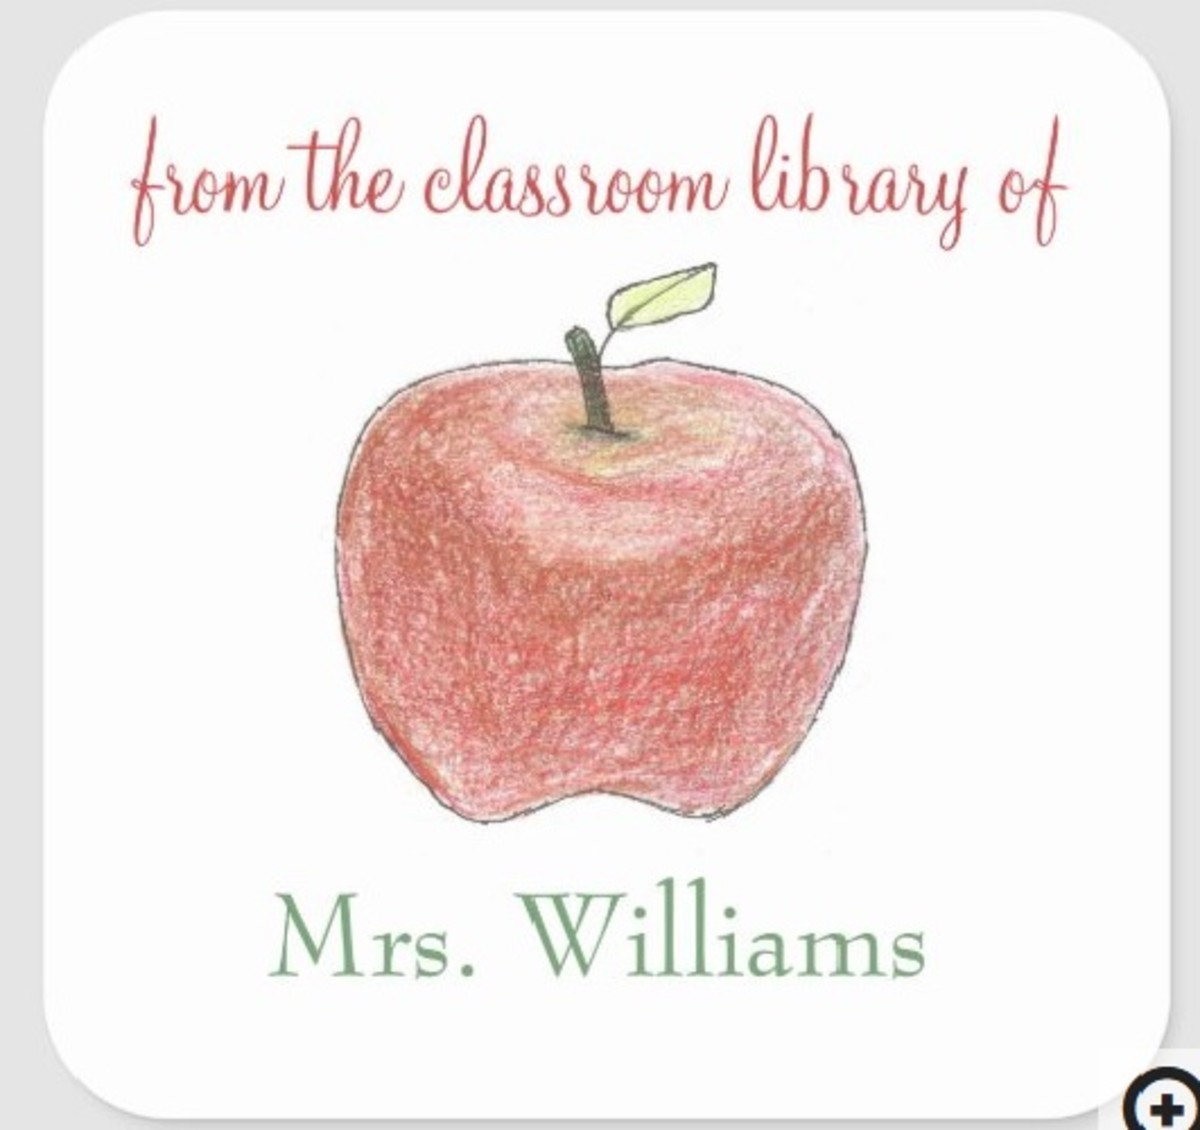 Seeking great end of year teacher gifts for your favorite preschool (or other grade level!) educator? These teacher bookplates fit the bill--as do gently used books your family has outgrown and is ready to donate, or new books, if budget allows.